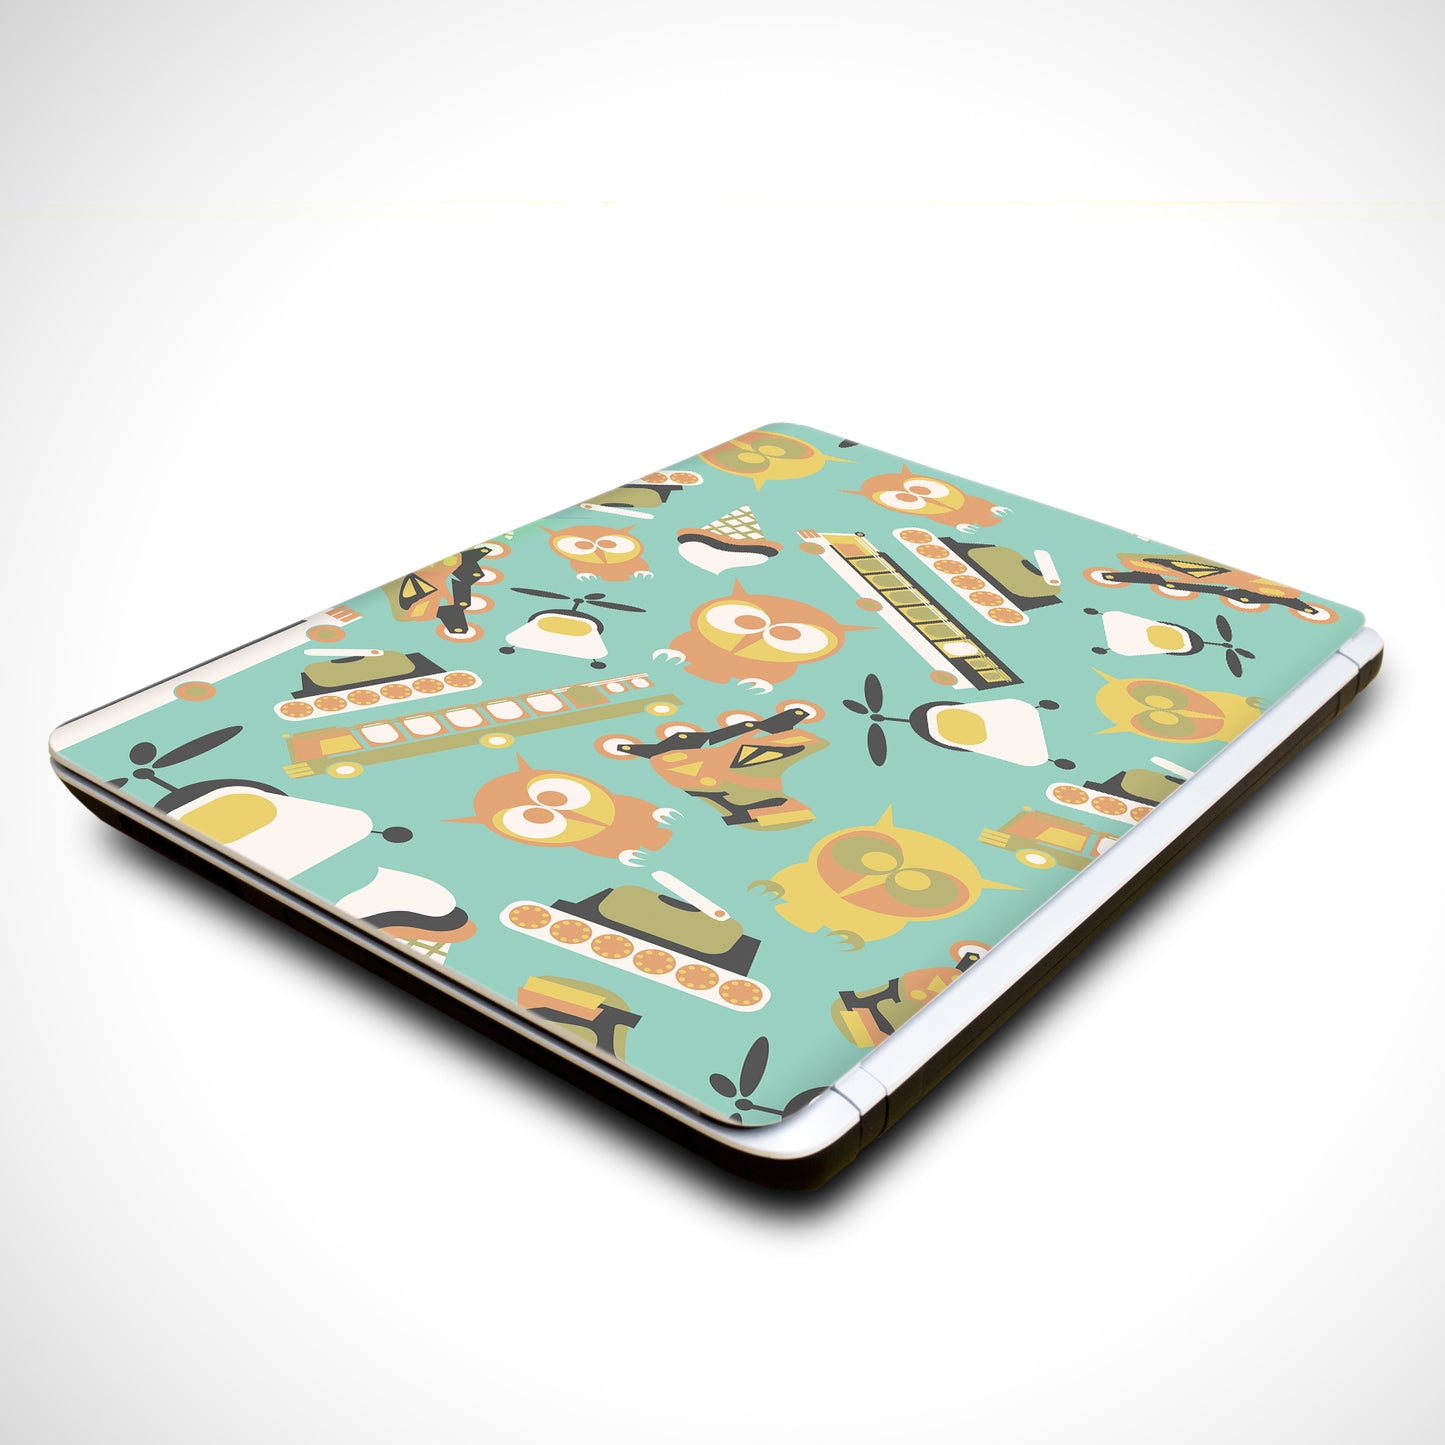 iberry's Vinyl Laptop Skin Sticker Collection for Dell, Hp, Toshiba, Acer, Asus & All Models (Upto 15.6 inches) -15